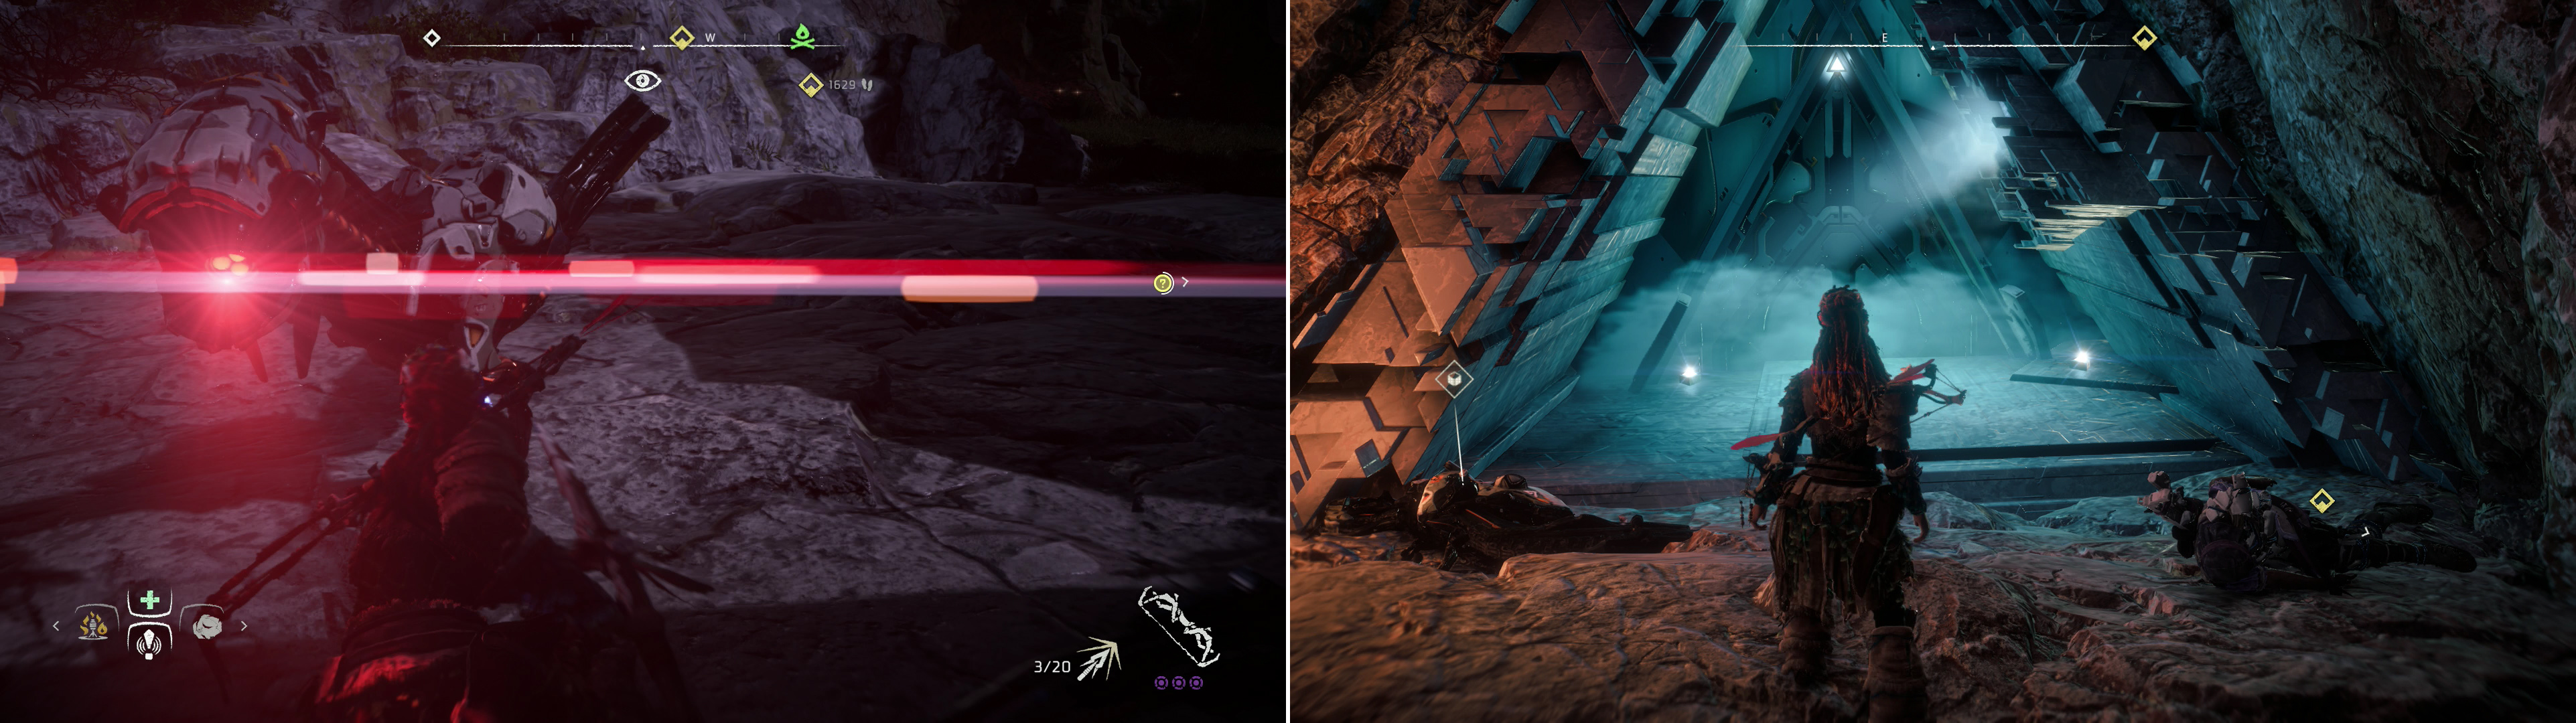 Destroy the Watchers outside Cauldron RHO (left) then descend into a pit to find a subterranean door you can override (right).